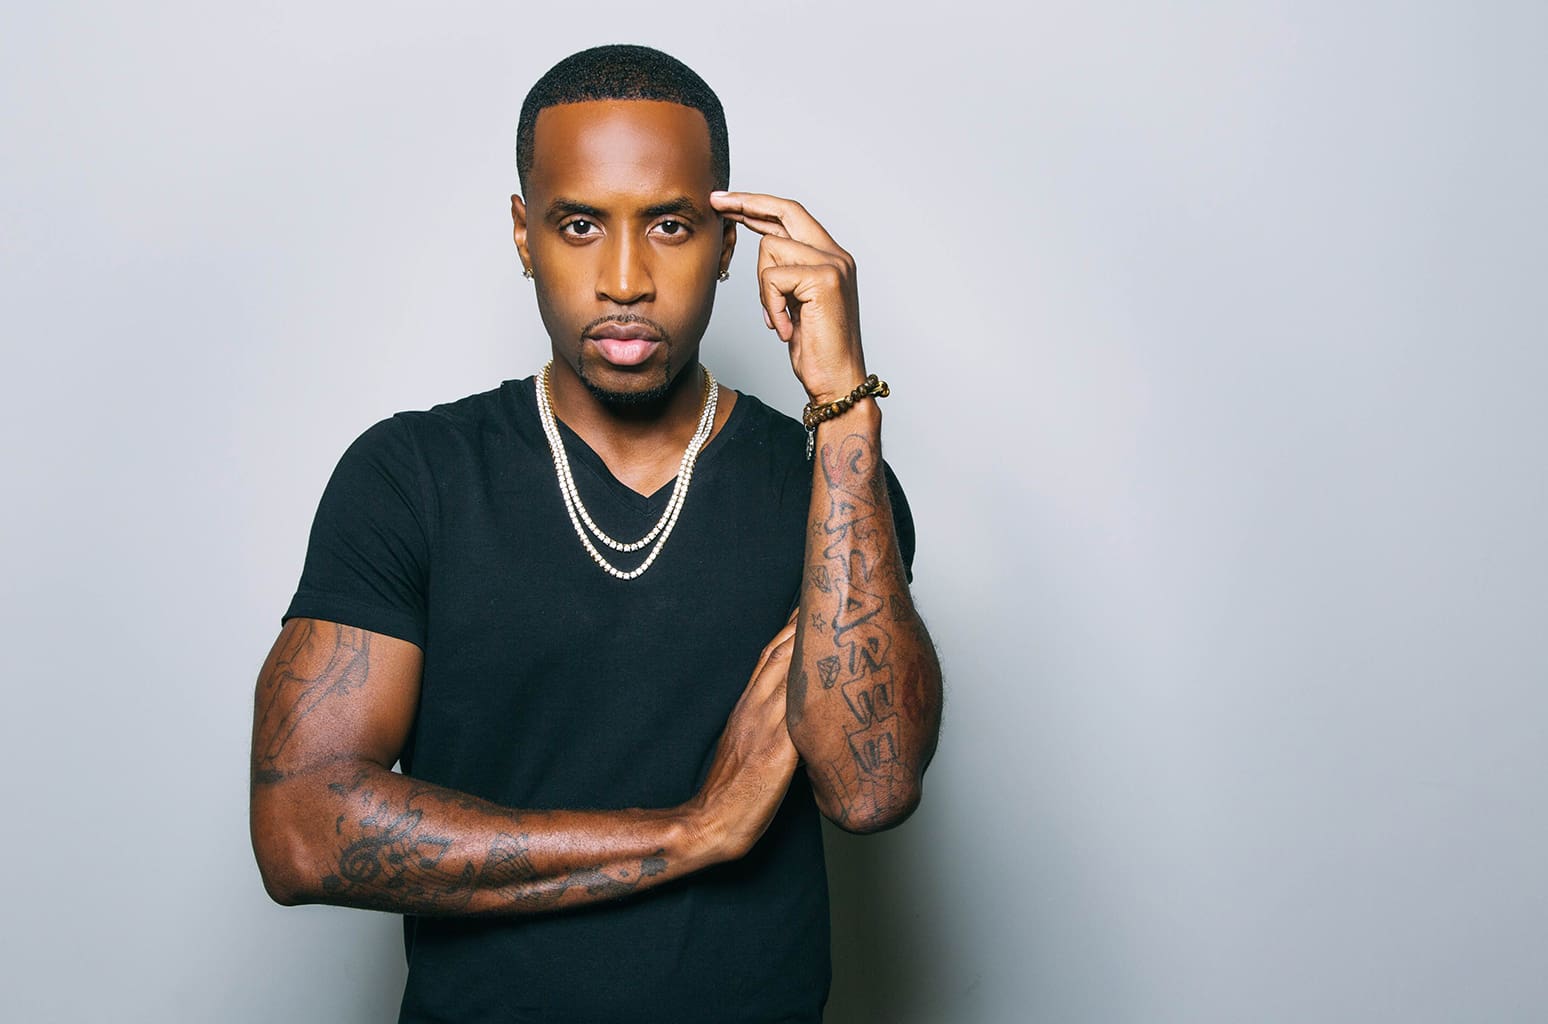 Safaree Is Already In The Studio Making Anti-Gucci Music - Here's A Sample